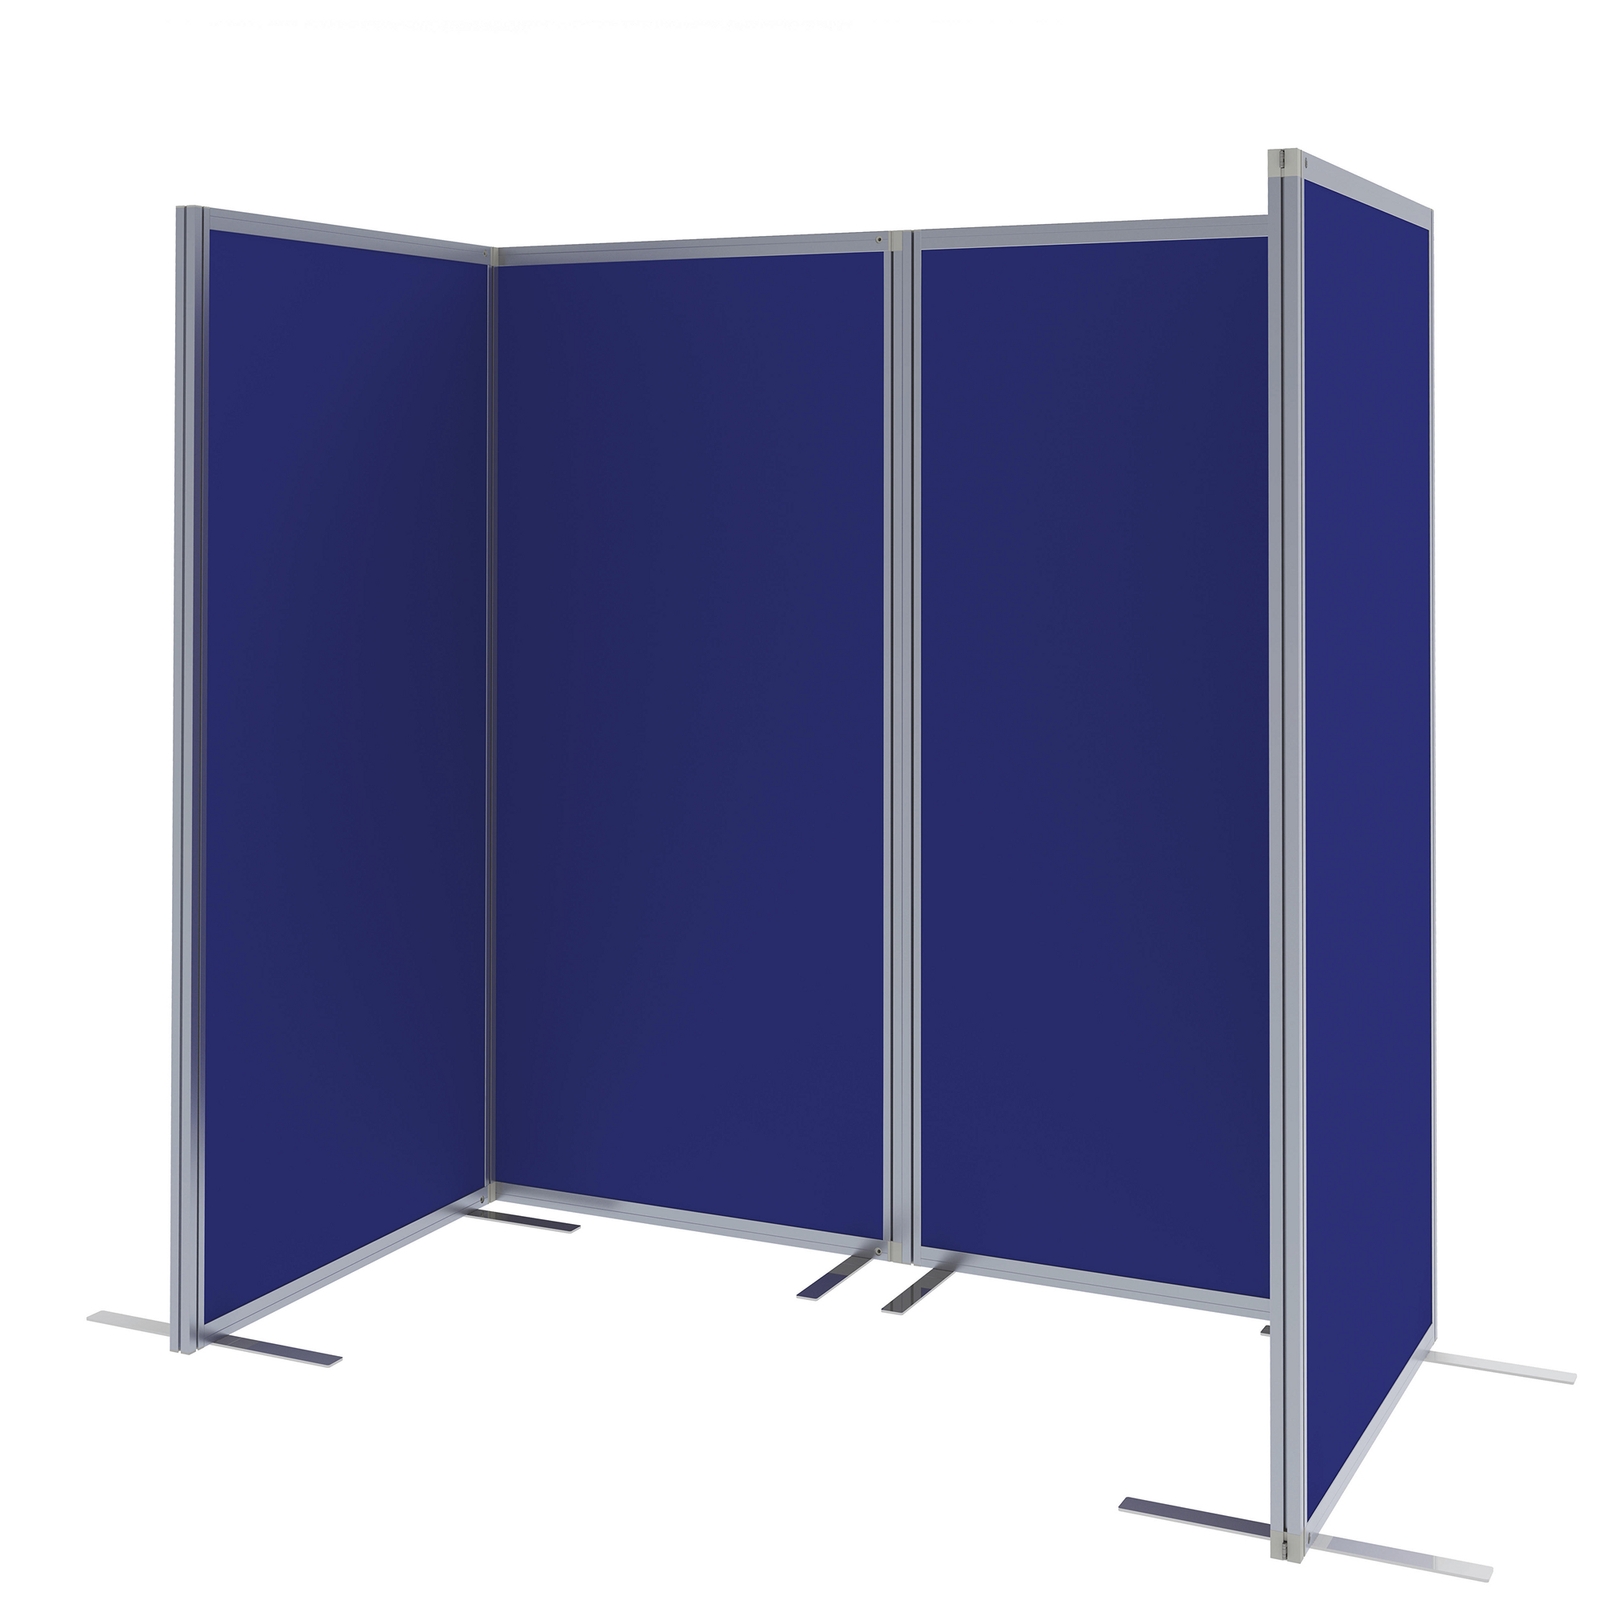 4 Panel Gallery Display System - 360x180